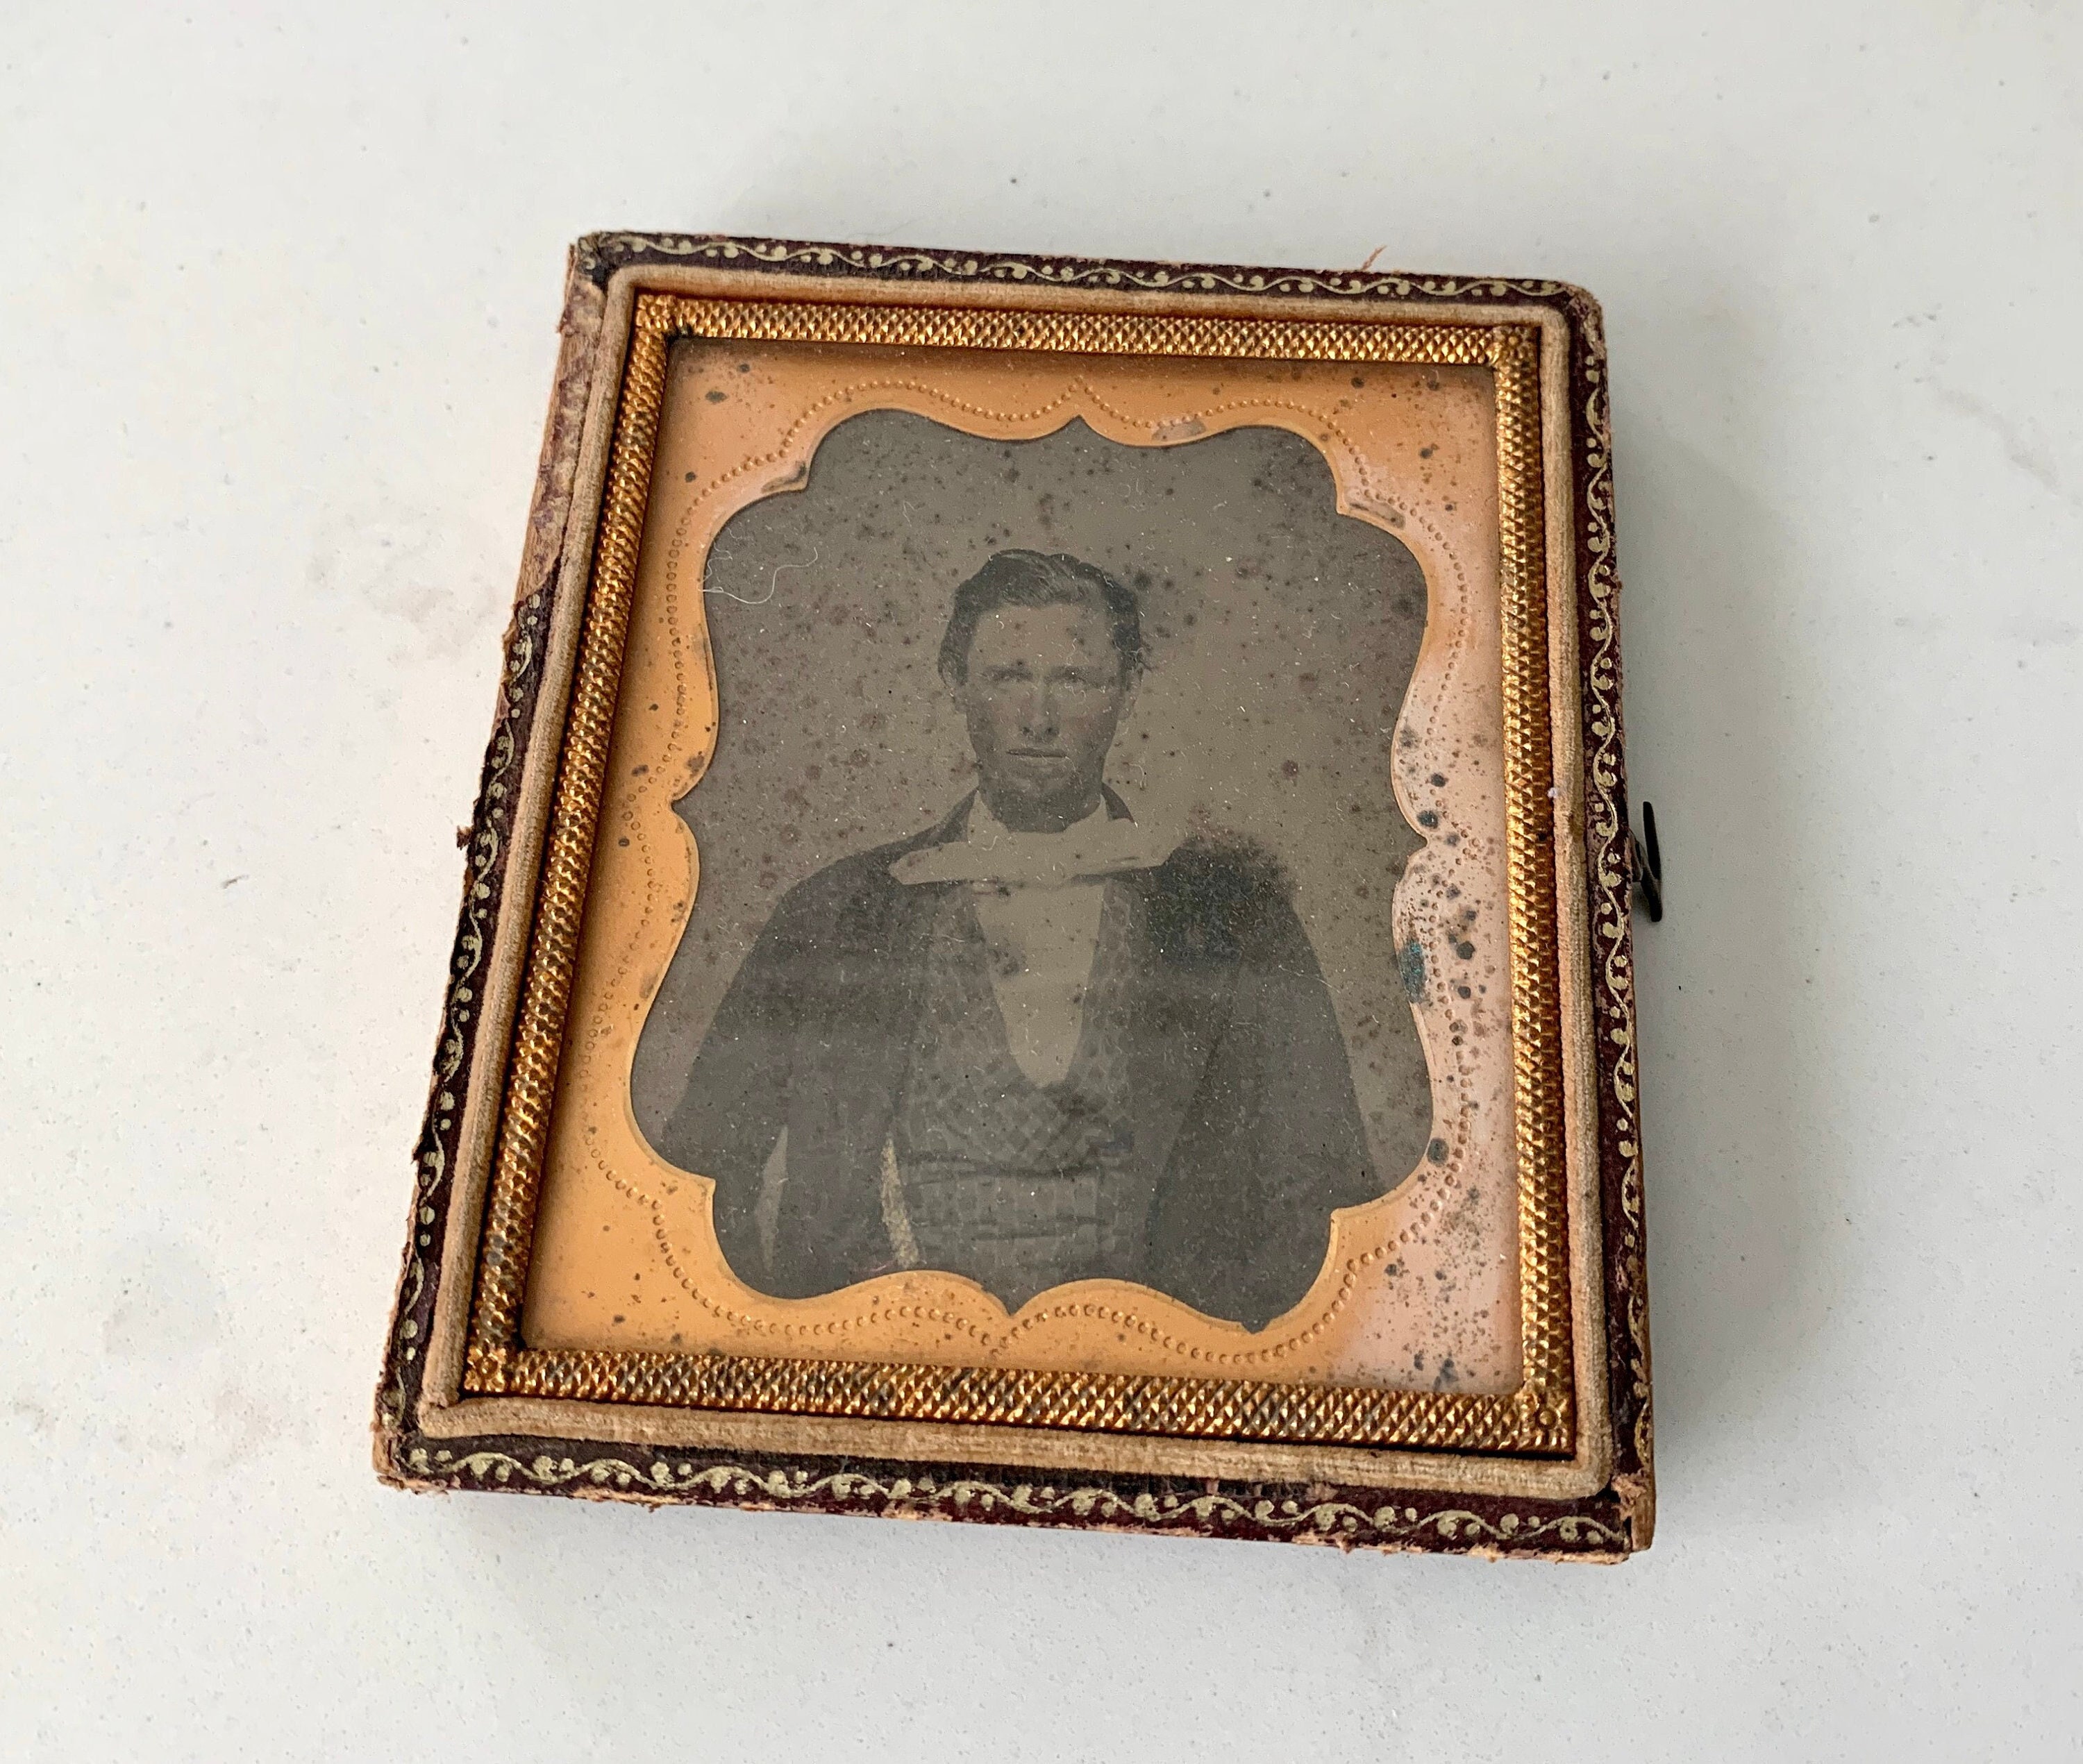 Antique TinType Photograph 1/6 Plate 19th Century Portrait of Man in Copper Matte Preserver Leather Bound Carrying Case Tin Type